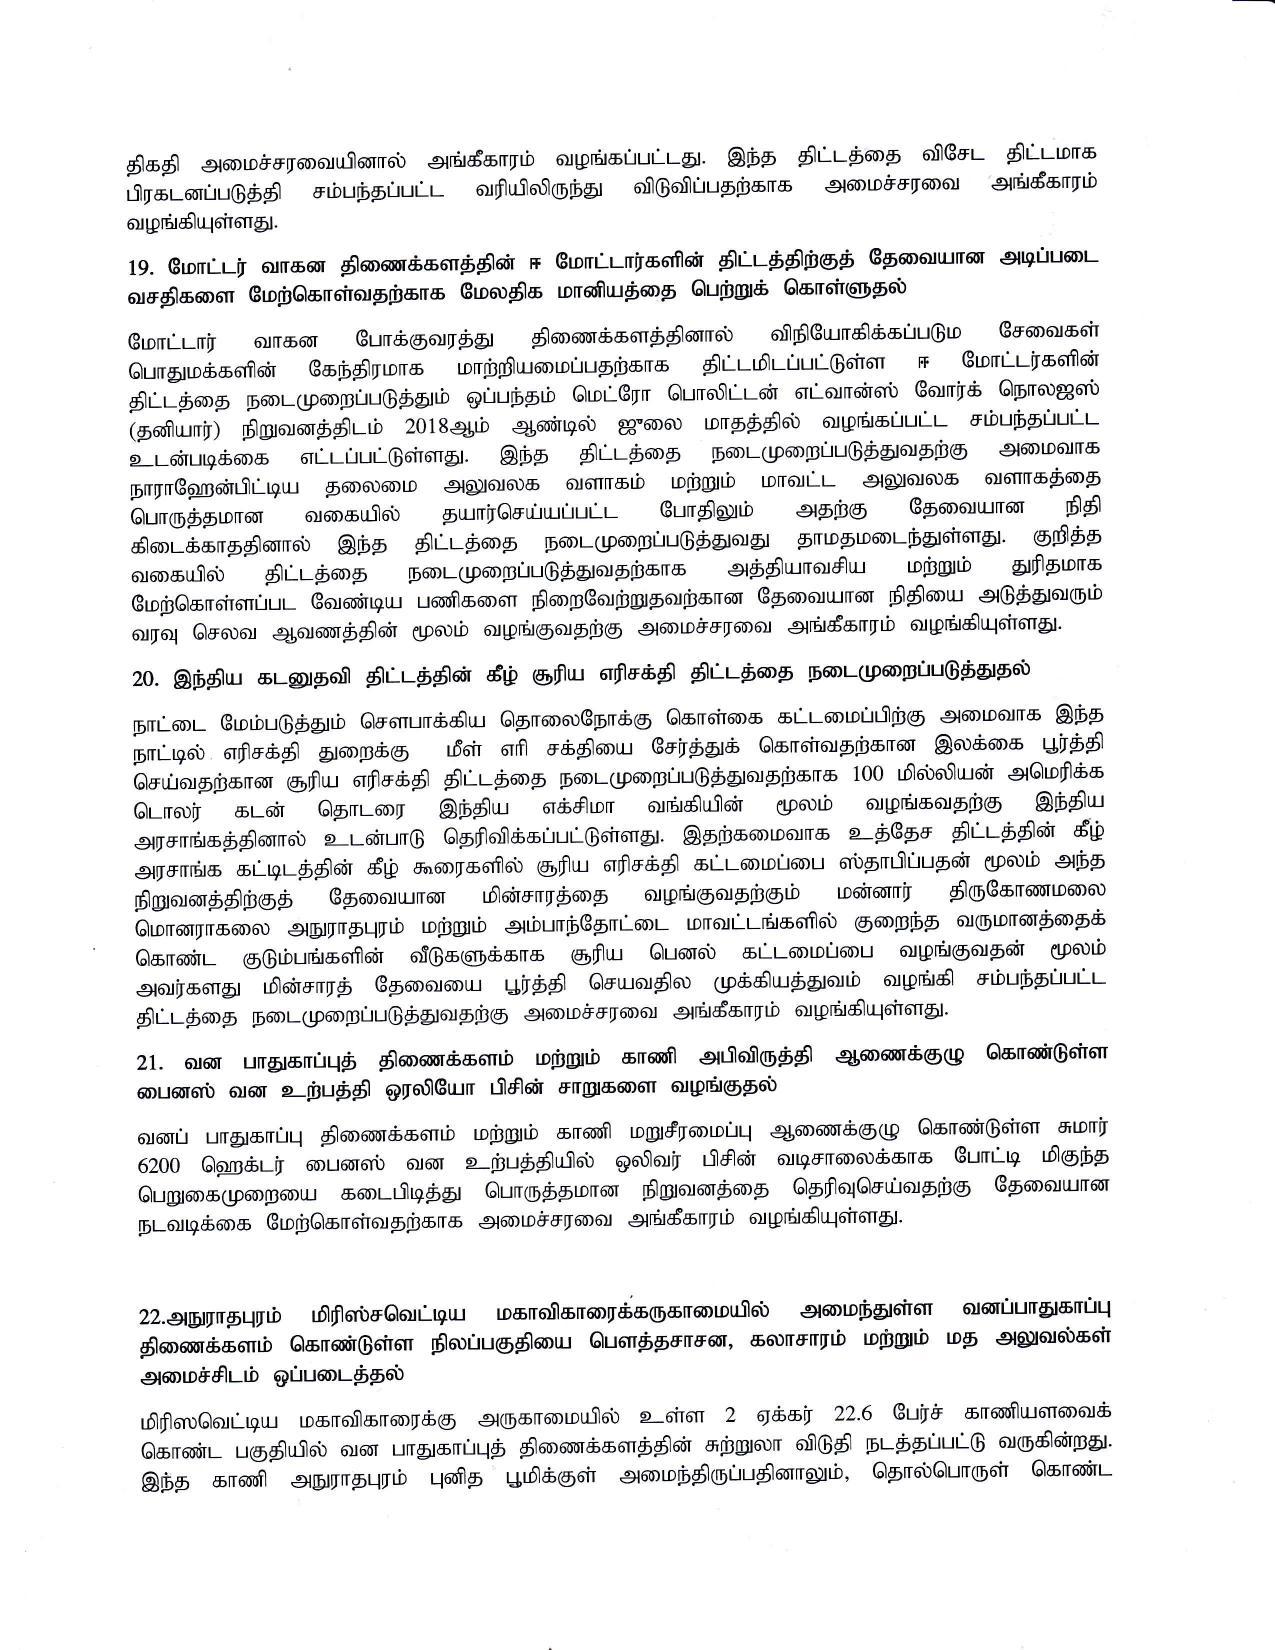 Tamil Cabinet 11.06.20 min page 007